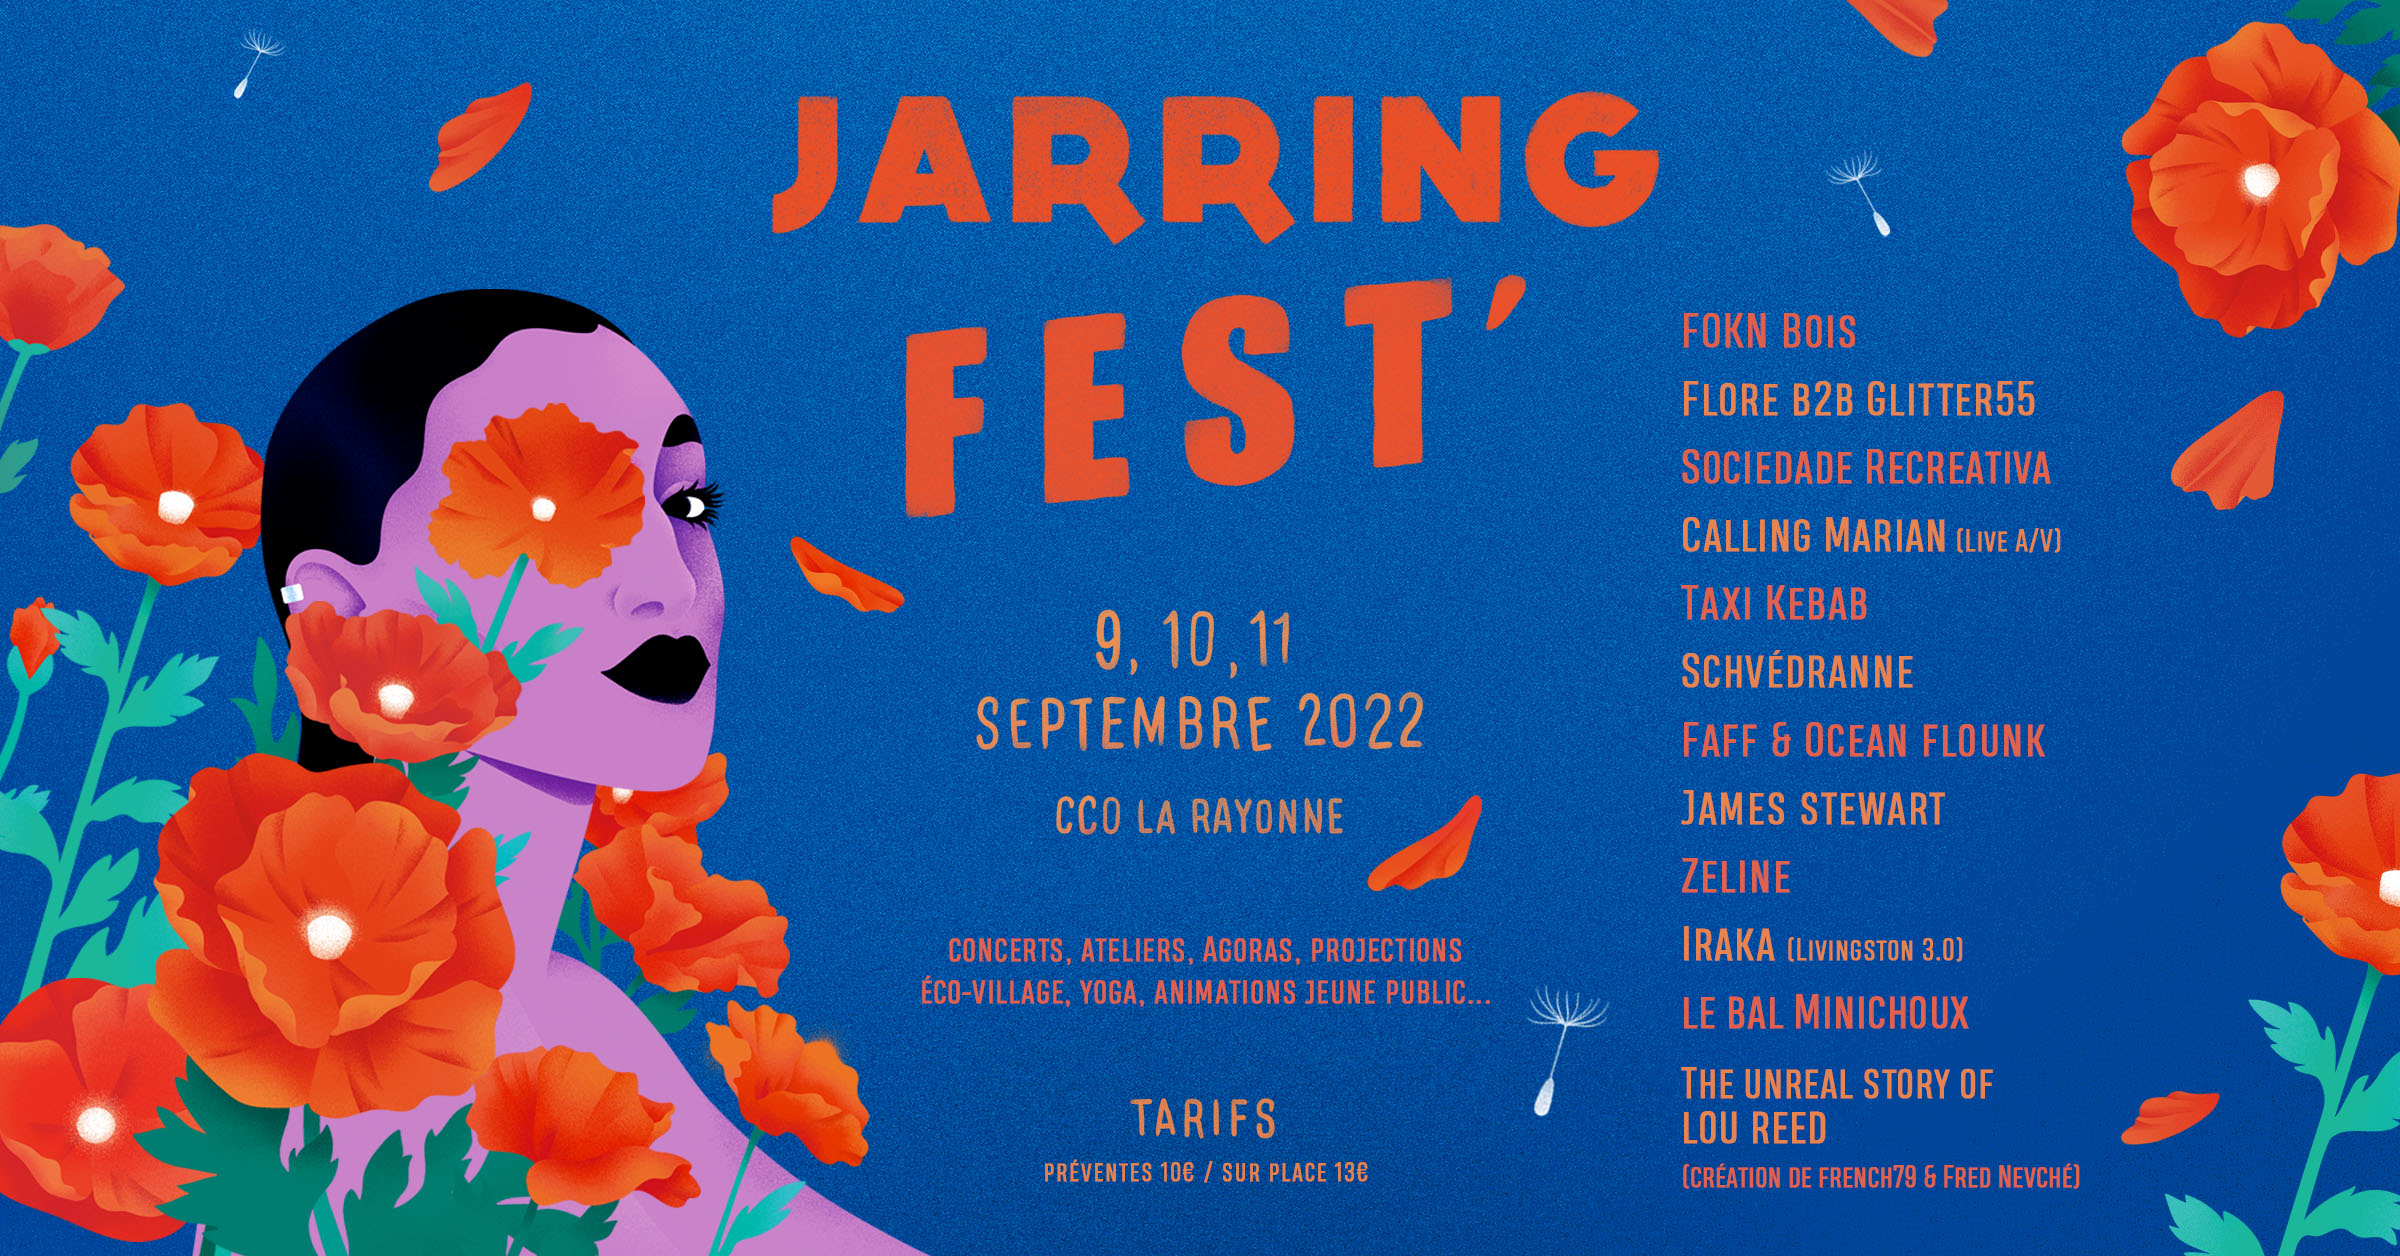 The great return of the JARRING FEST' !